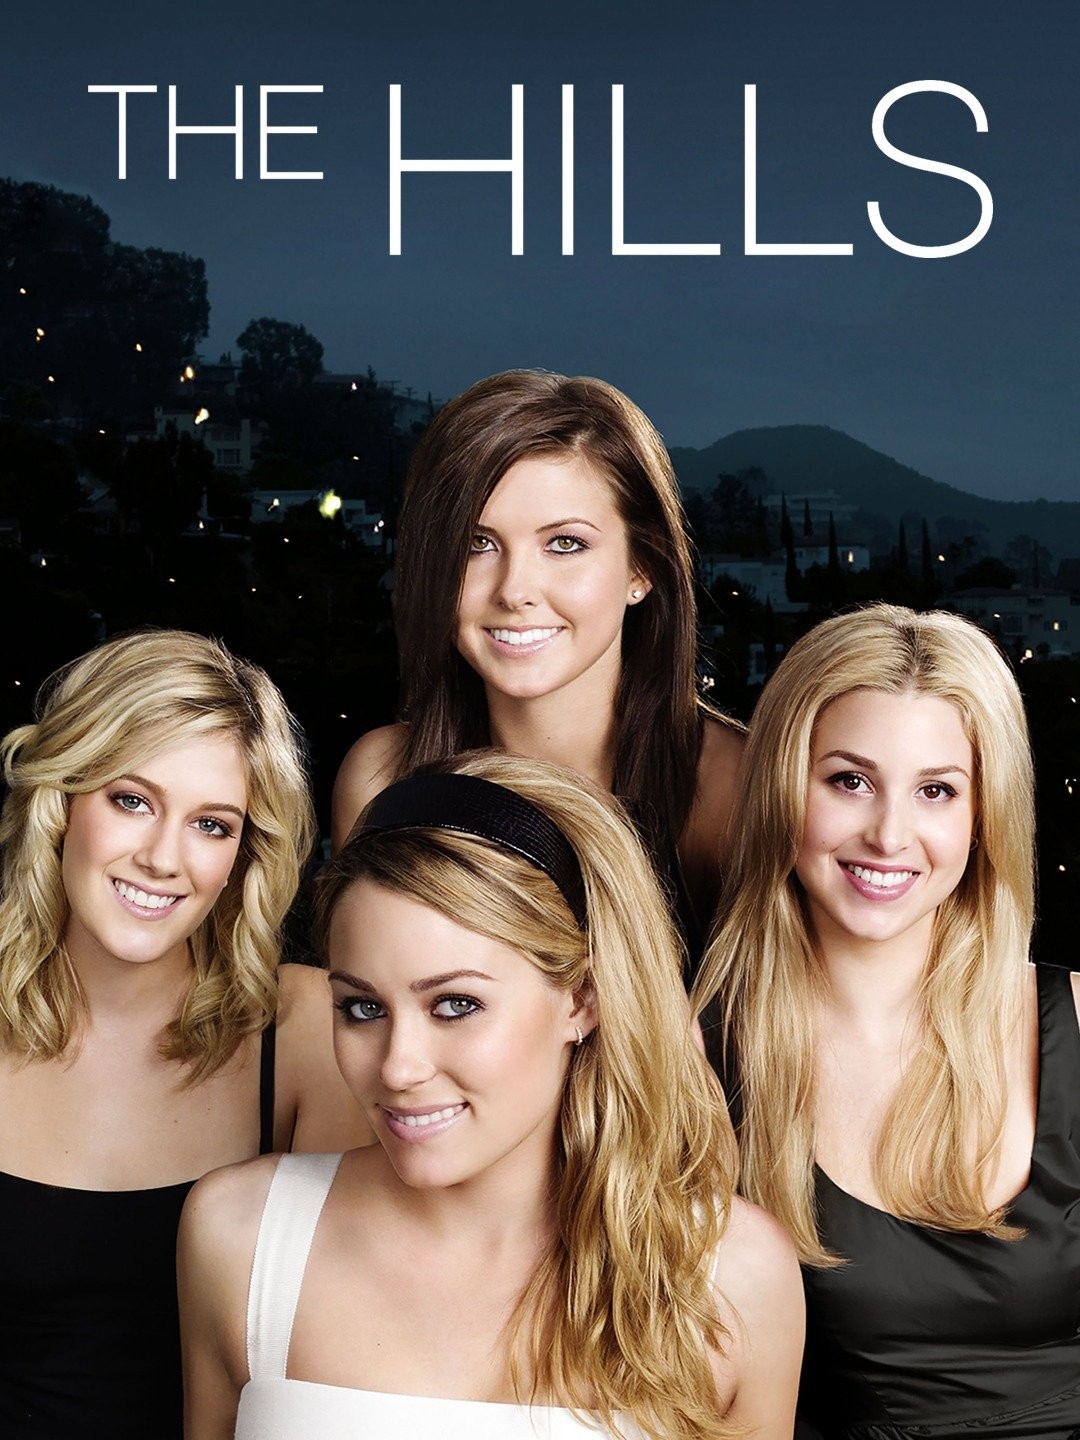 Lauren Conrad at Area For Season 3 of the Hills Finale December 10